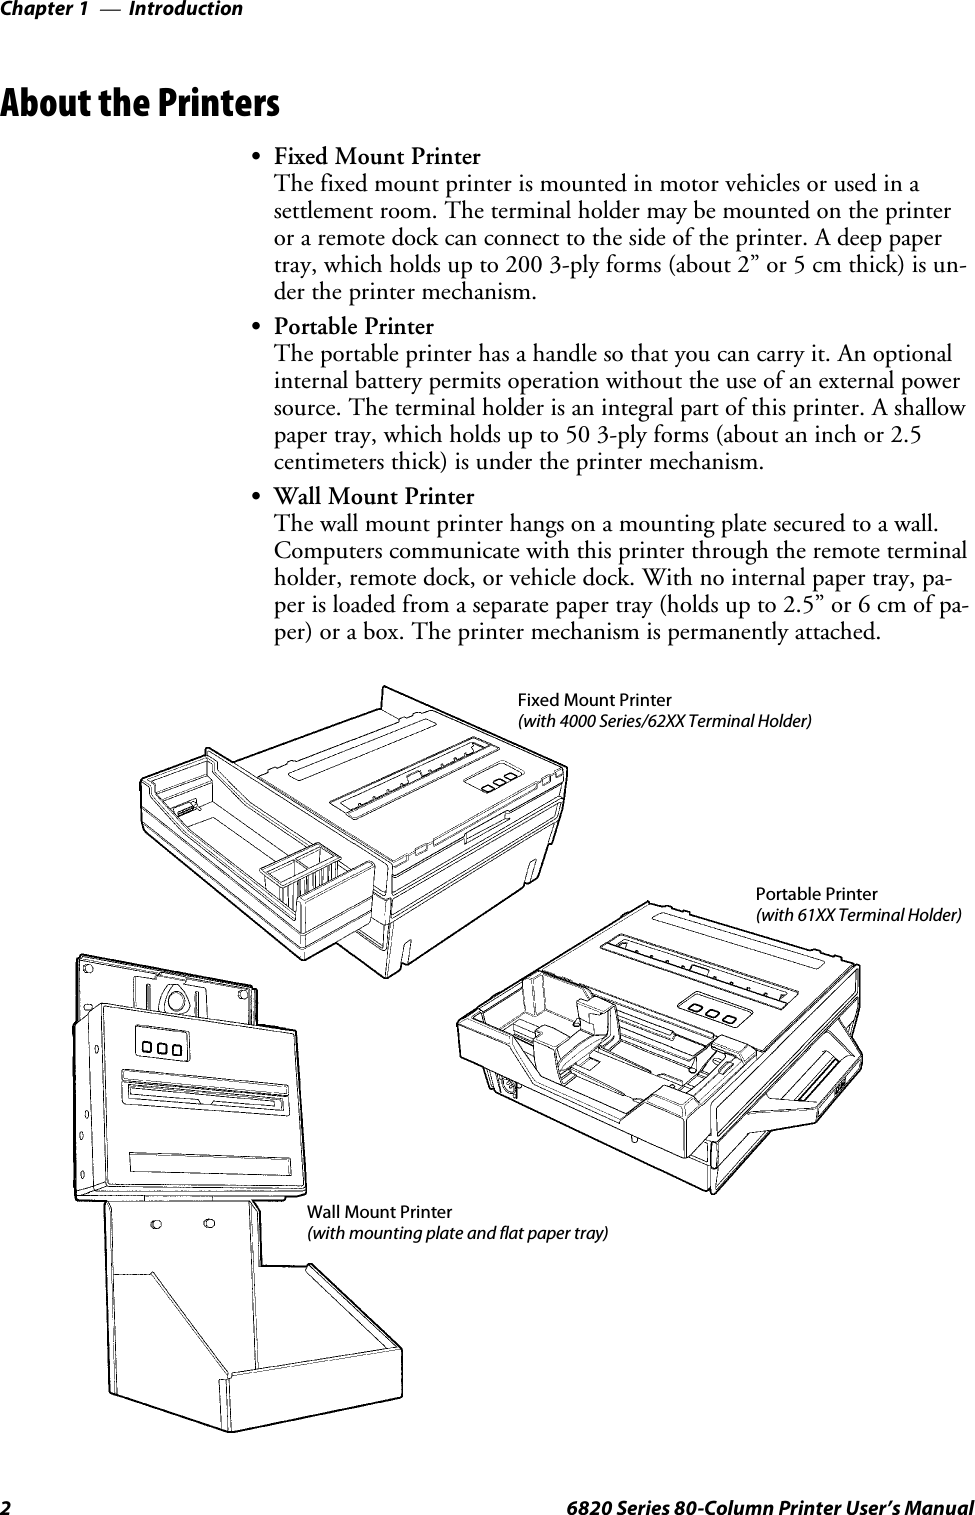 IntroductionChapter —12 6820 Series 80-Column Printer User’s ManualAbout the PrintersSFixed Mount PrinterThe fixed mount printer is mounted in motor vehicles or used in asettlement room. The terminal holder may be mounted on the printeror a remote dock can connect to the side of the printer. A deep papertray, which holds up to 200 3-ply forms (about 2” or 5 cm thick) is un-dertheprintermechanism.SPortable PrinterThe portable printer has a handle so that you can carry it. An optionalinternal battery permits operation without the use of an external powersource. The terminal holder is an integral part of this printer. A shallowpaper tray, which holds up to 50 3-ply forms (about an inch or 2.5centimeters thick) is under the printer mechanism.SWall Mount PrinterThe wall mount printer hangs on a mounting plate secured to a wall.Computers communicate with this printer through the remote terminalholder, remote dock, or vehicle dock. With no internal paper tray, pa-per is loaded from a separate paper tray (holds up to 2.5” or 6 cm of pa-per) or a box. The printer mechanism is permanently attached.Wall Mount Printer(with mounting plate and flat paper tray)Fixed Mount Printer(with 4000 Series/62XX Terminal Holder)Portable Printer(with 61XX Terminal Holder)